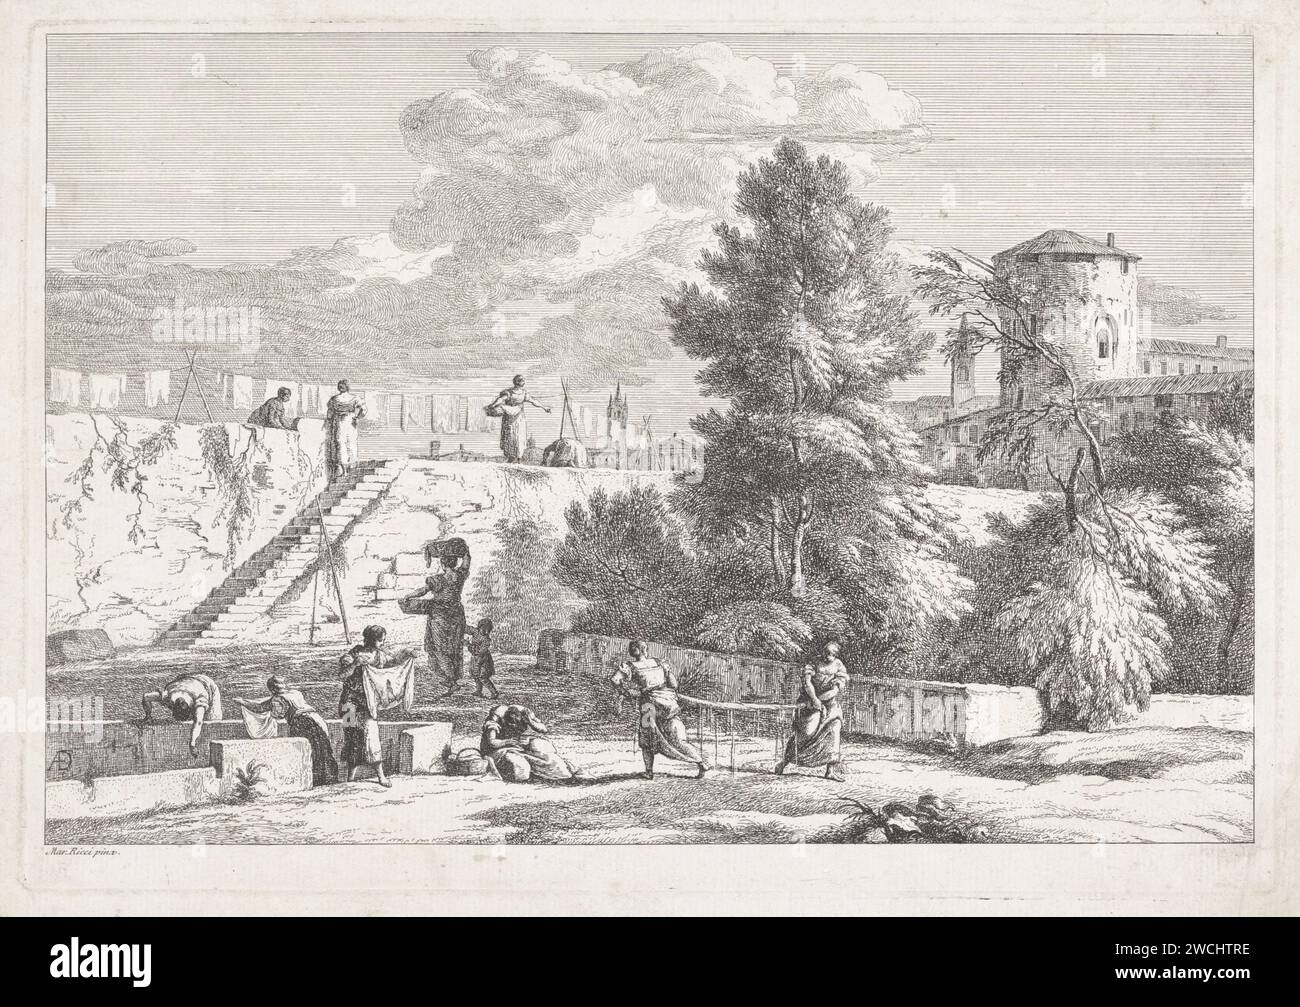 Landscape with women doing the laundry, Davide Antonio Fossati, After Marco Ricci, 1743 print Landscape with women who do the laundry. In the foreground on the left, clothes and sheets are washed. In the background they are hung on a clothesline. Italy paper etching landscapes. city-view, and landscape with man-made constructions. accessories and implements  laundering, e.g. clothes-peg, drying frame, (empty) washing line Stock Photo